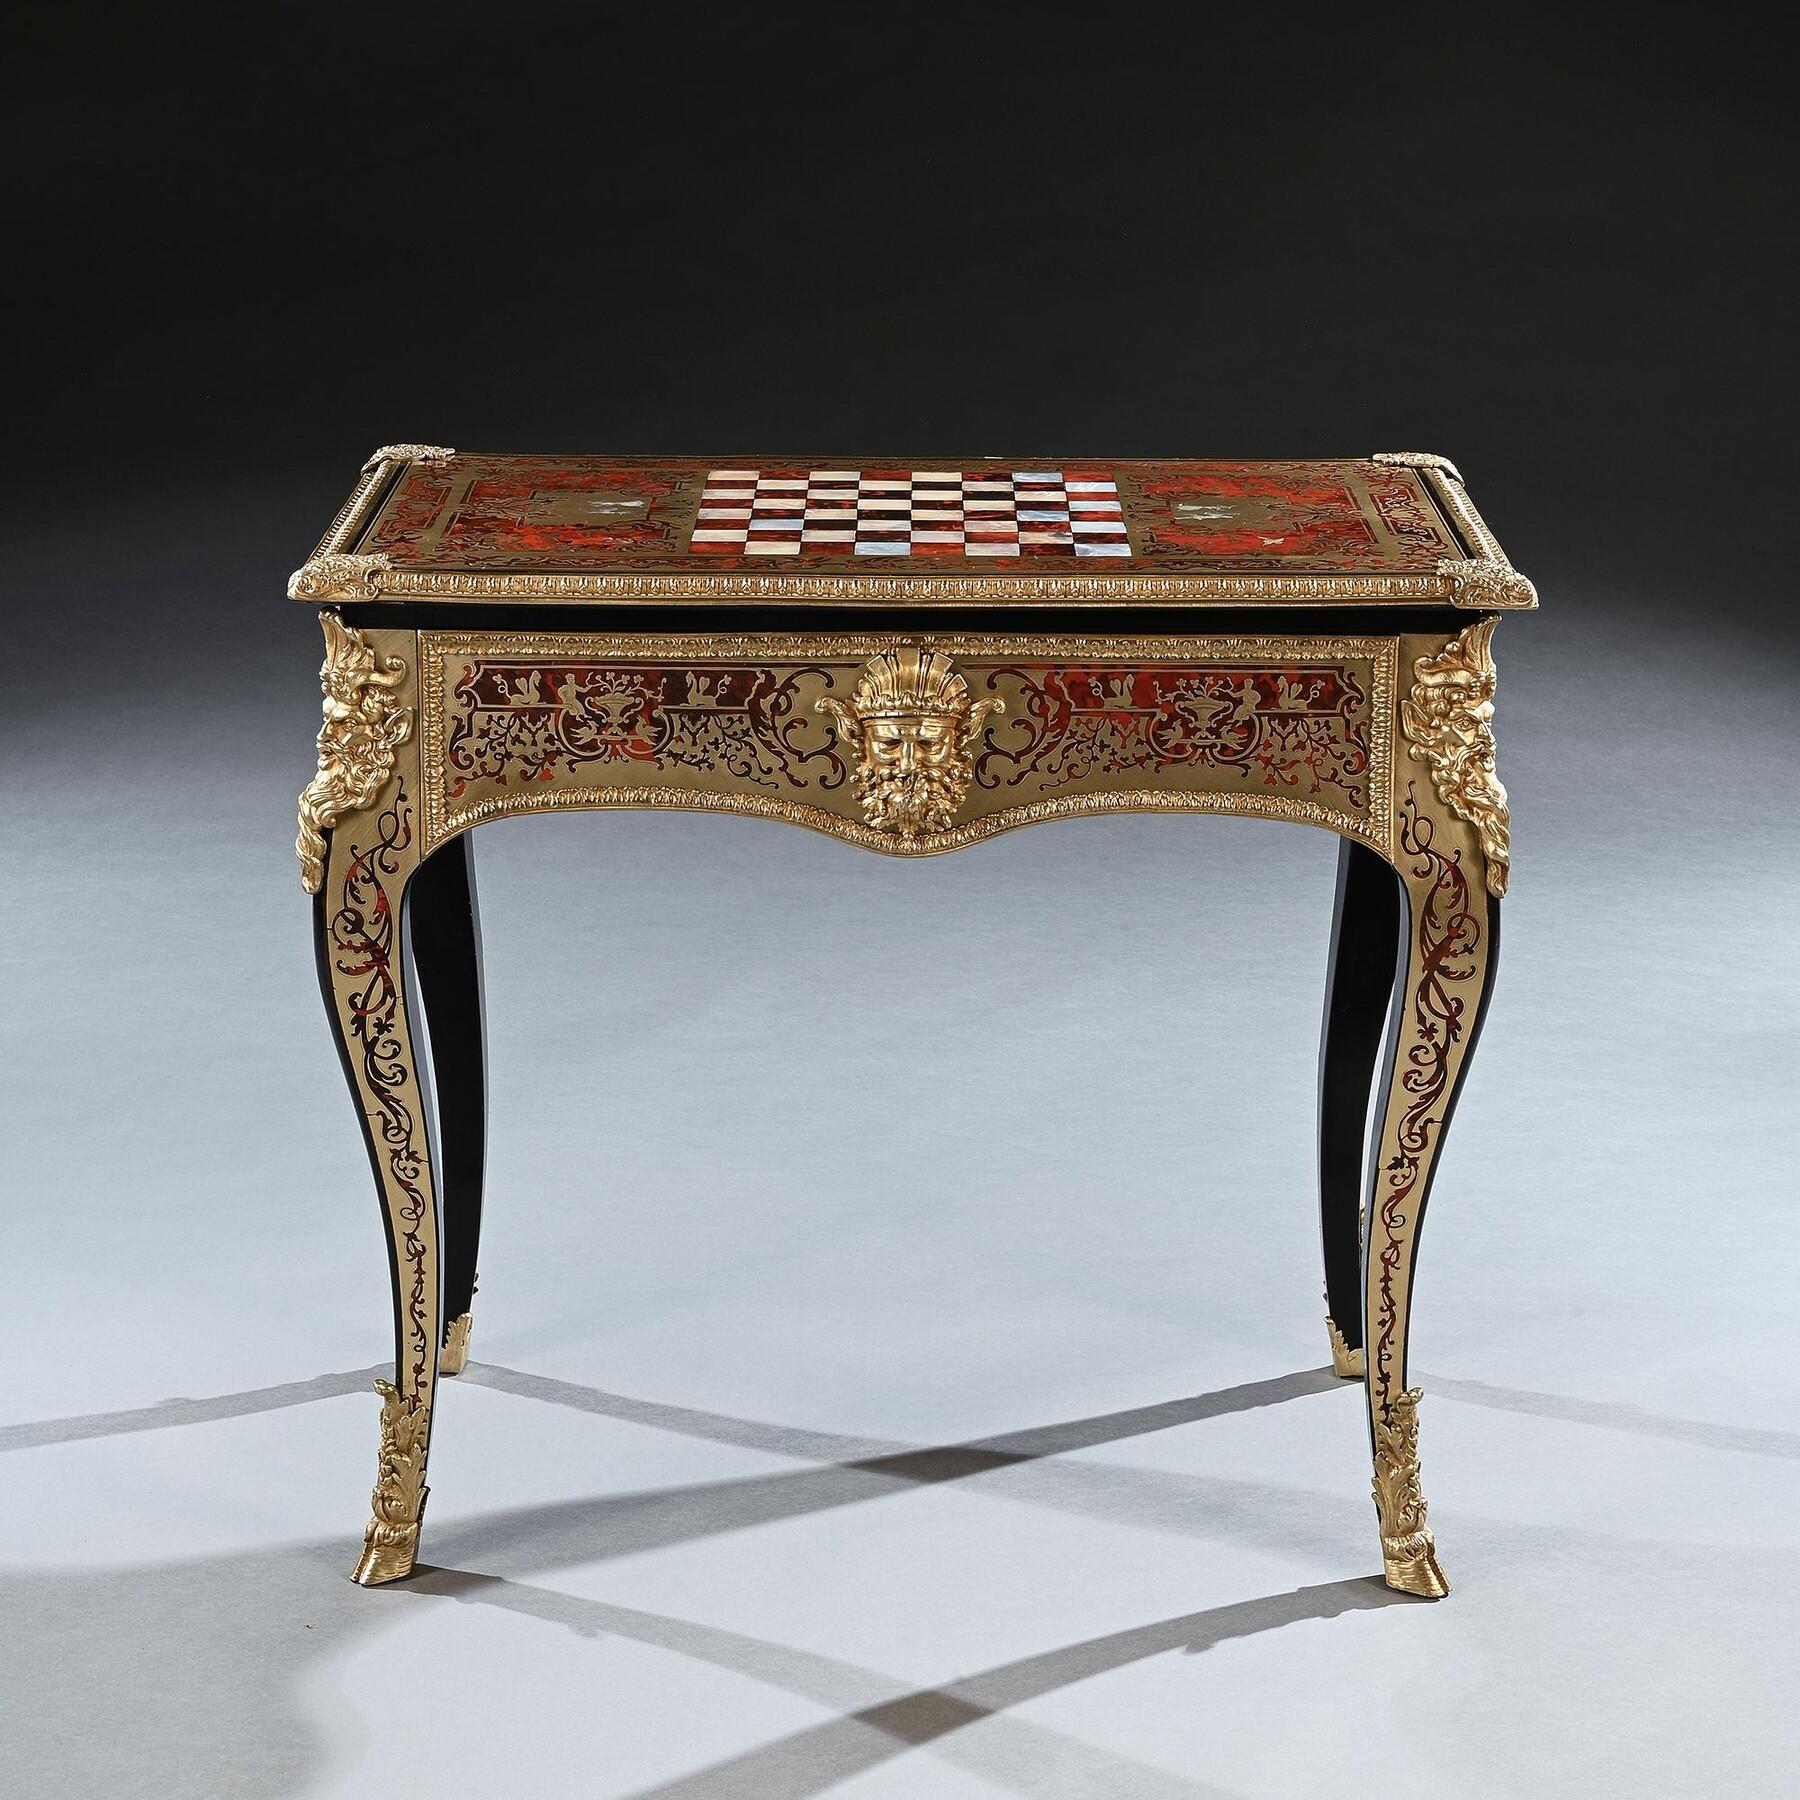 Louis XVI An Exceptional George Iv Period Boulle Games Table Attributed to Thomas Parker For Sale